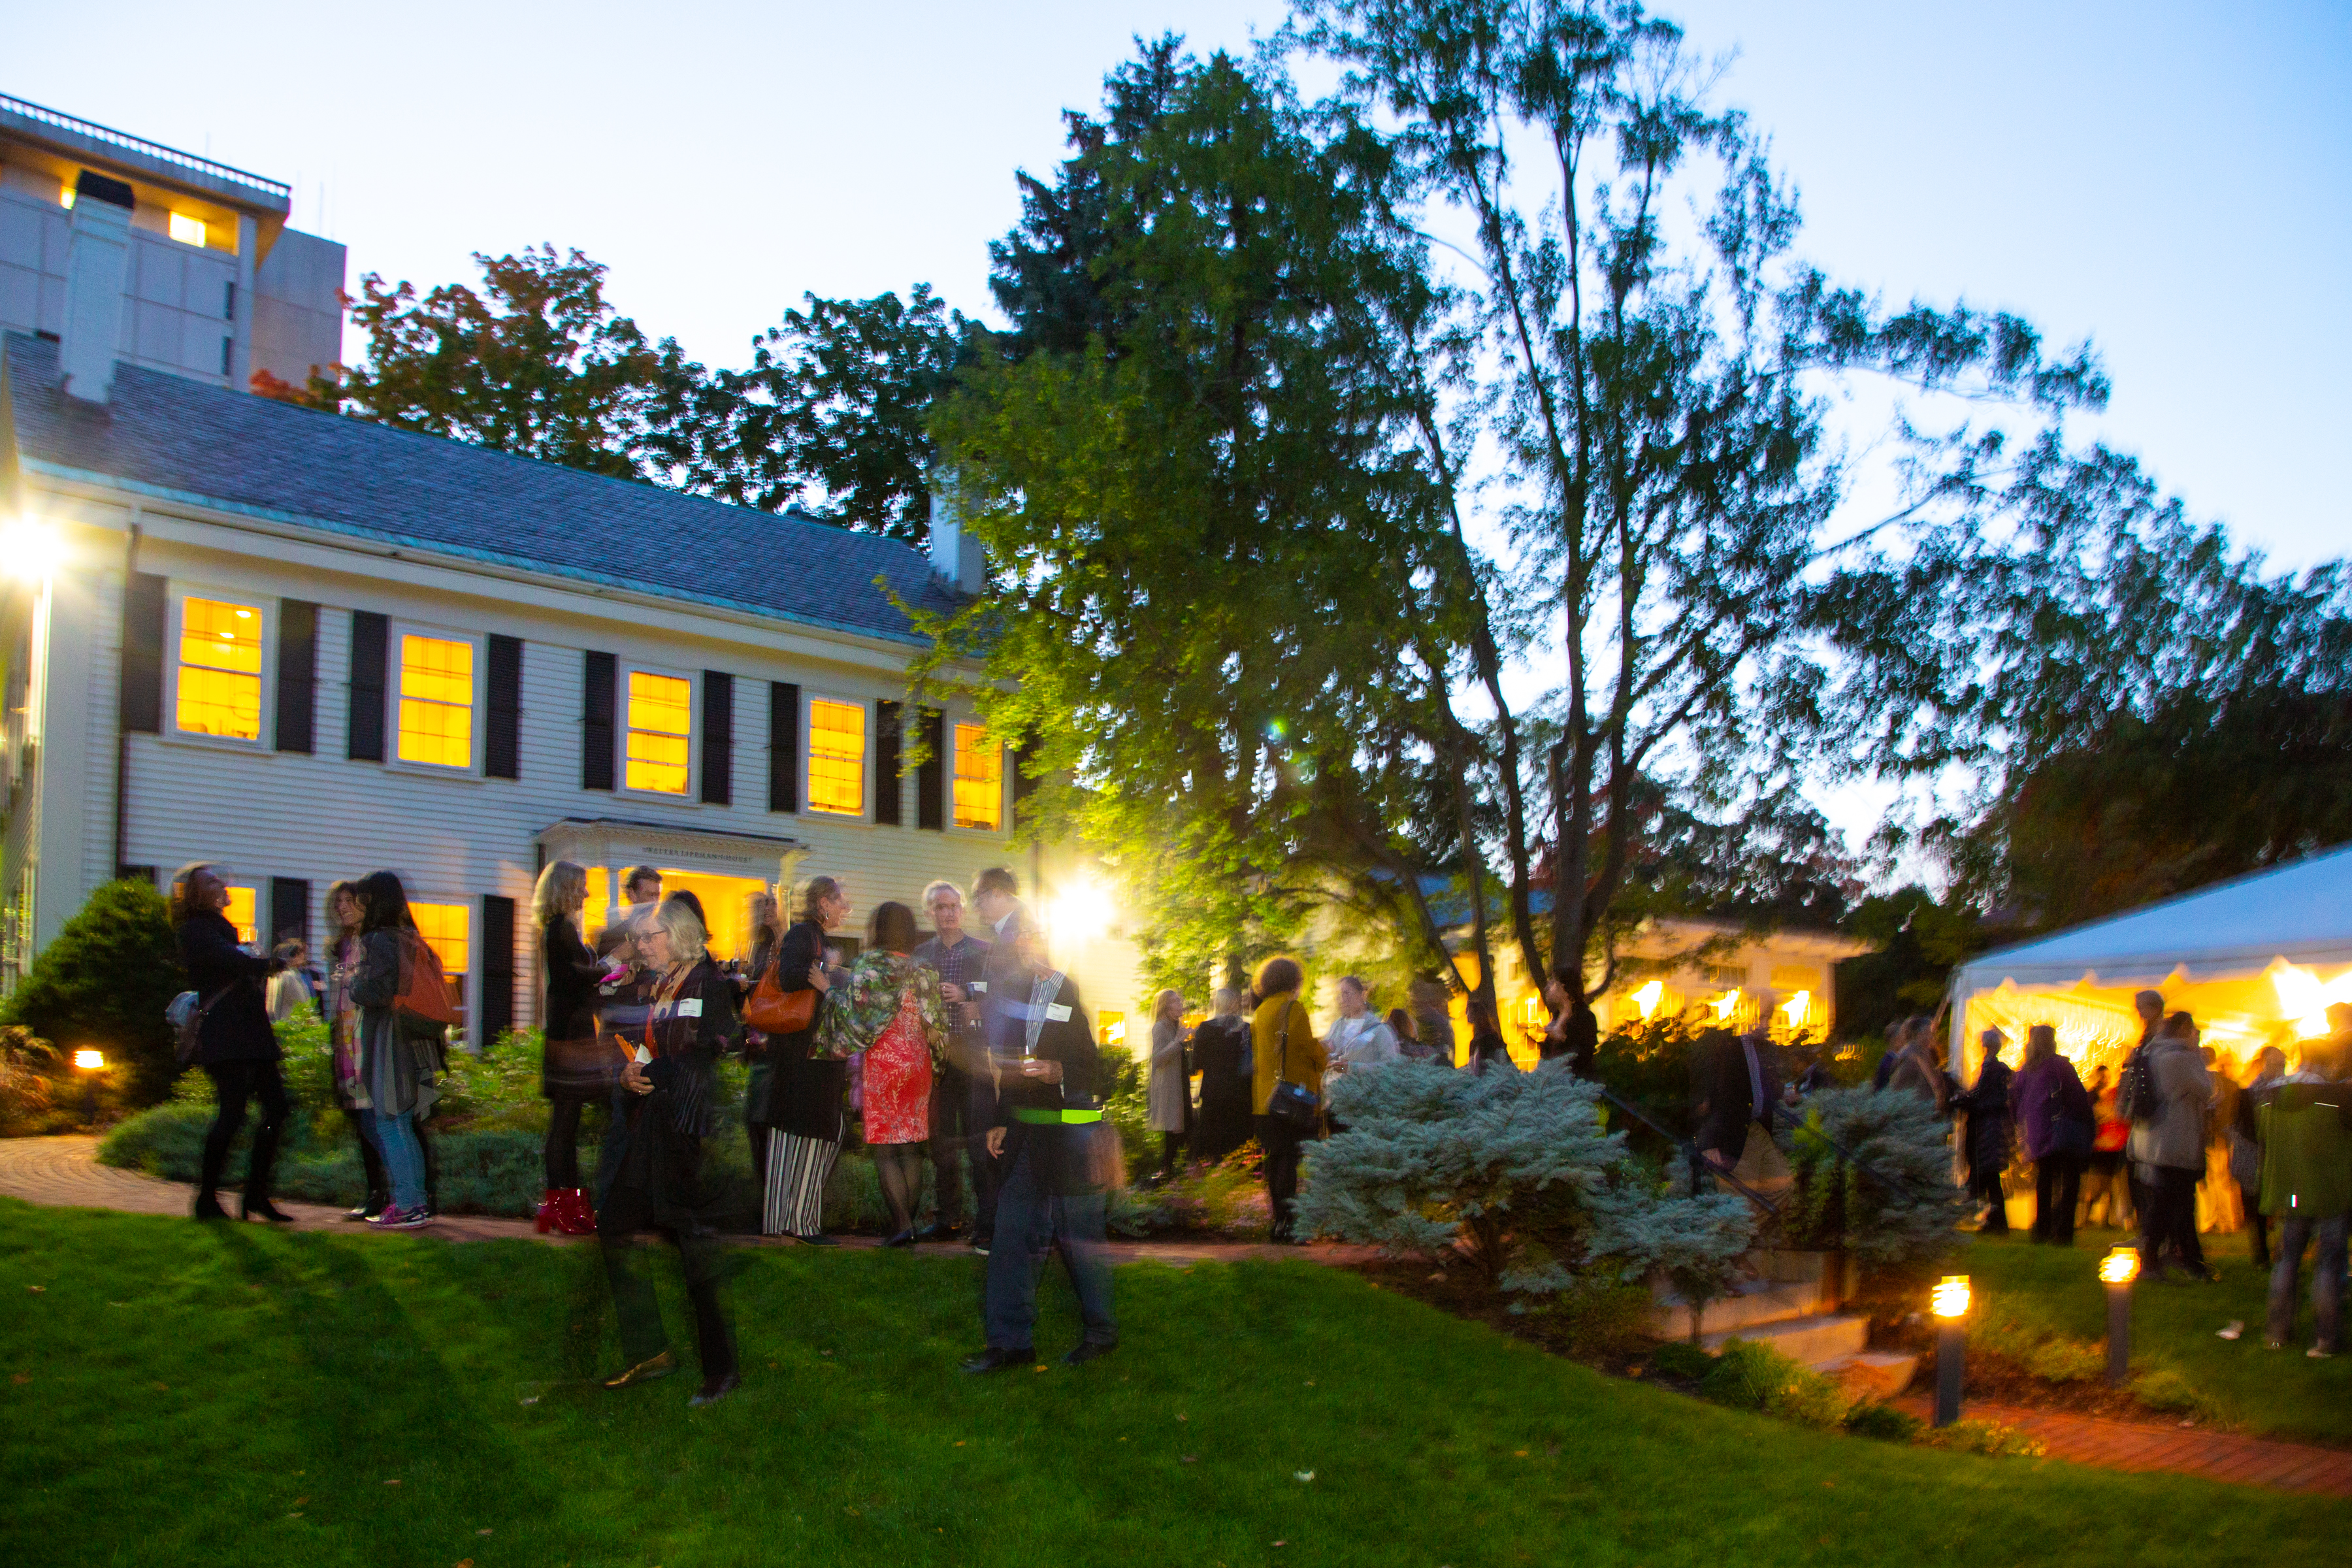 Walter Lippmann House is lit up during the 80th Alumni Reunion Weekend reception on Friday, October 12, 2018.